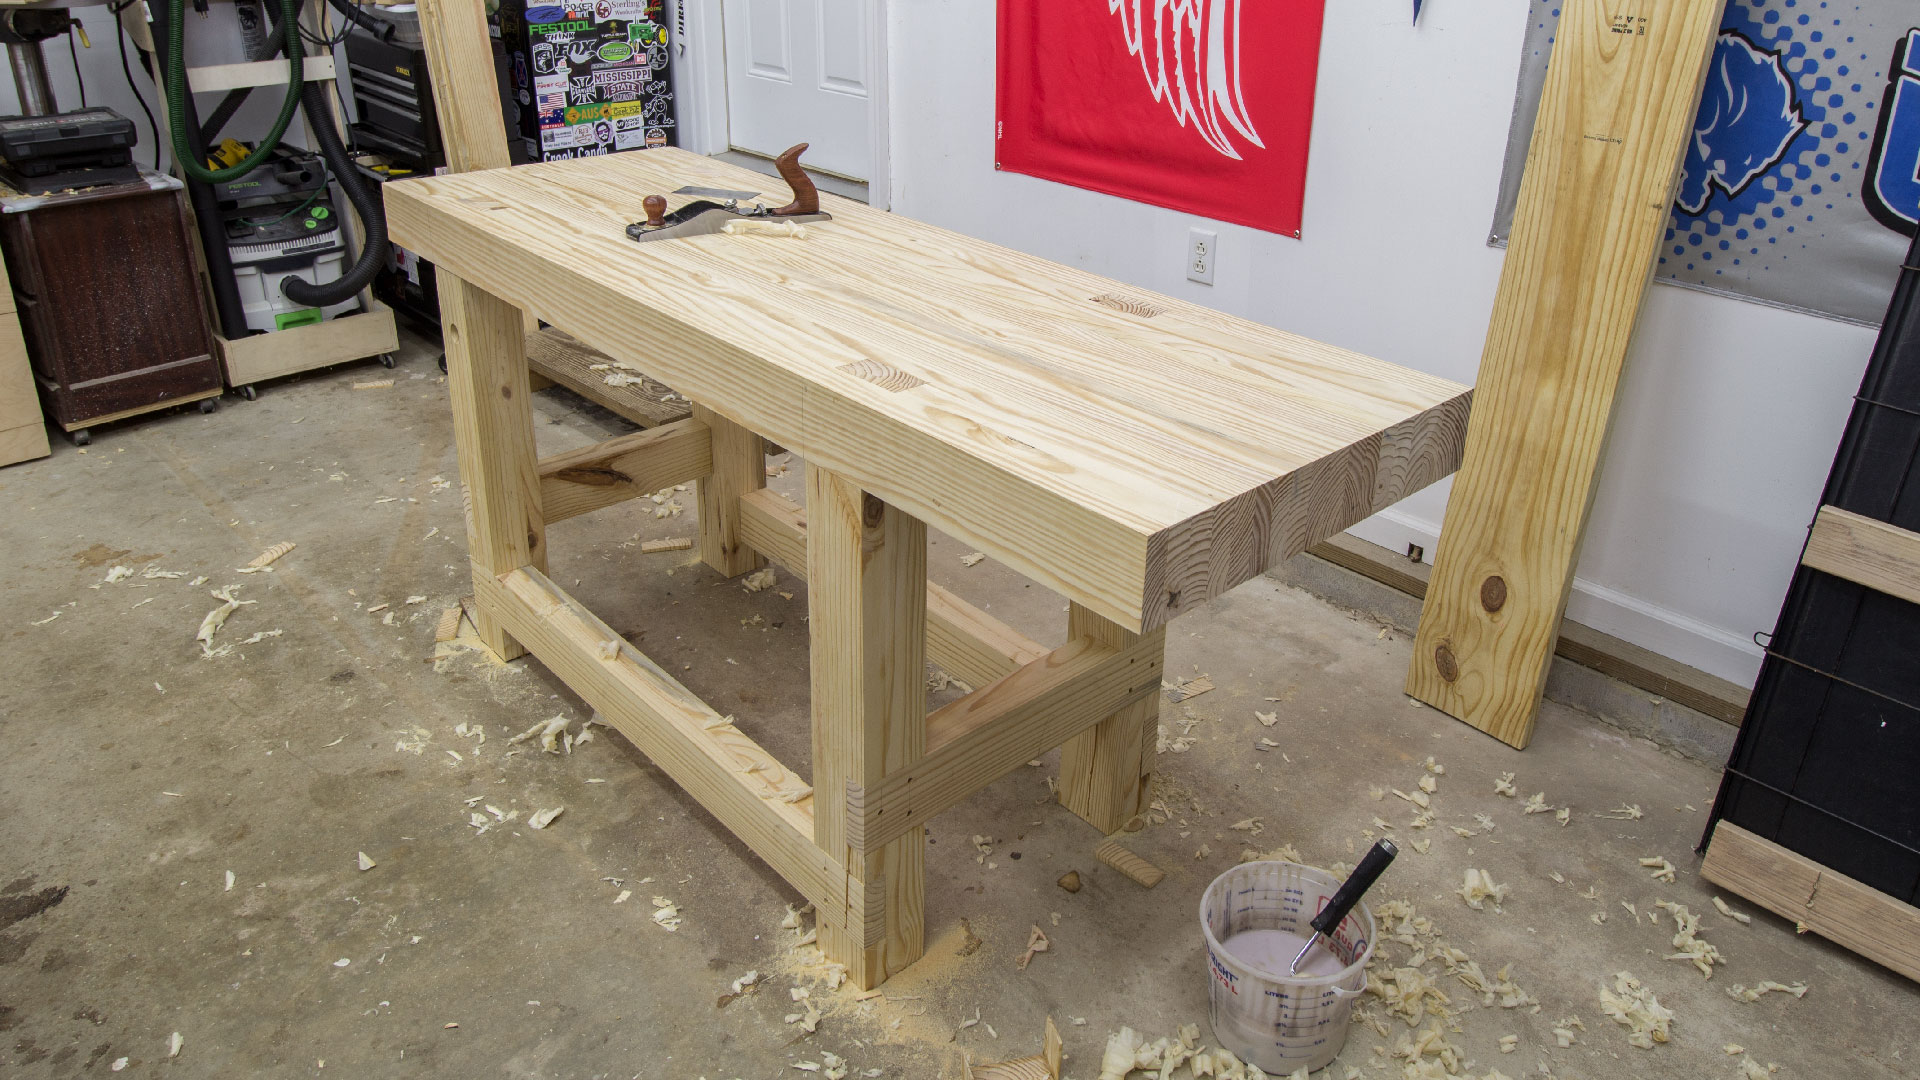 Jays woodworking bench Main Image